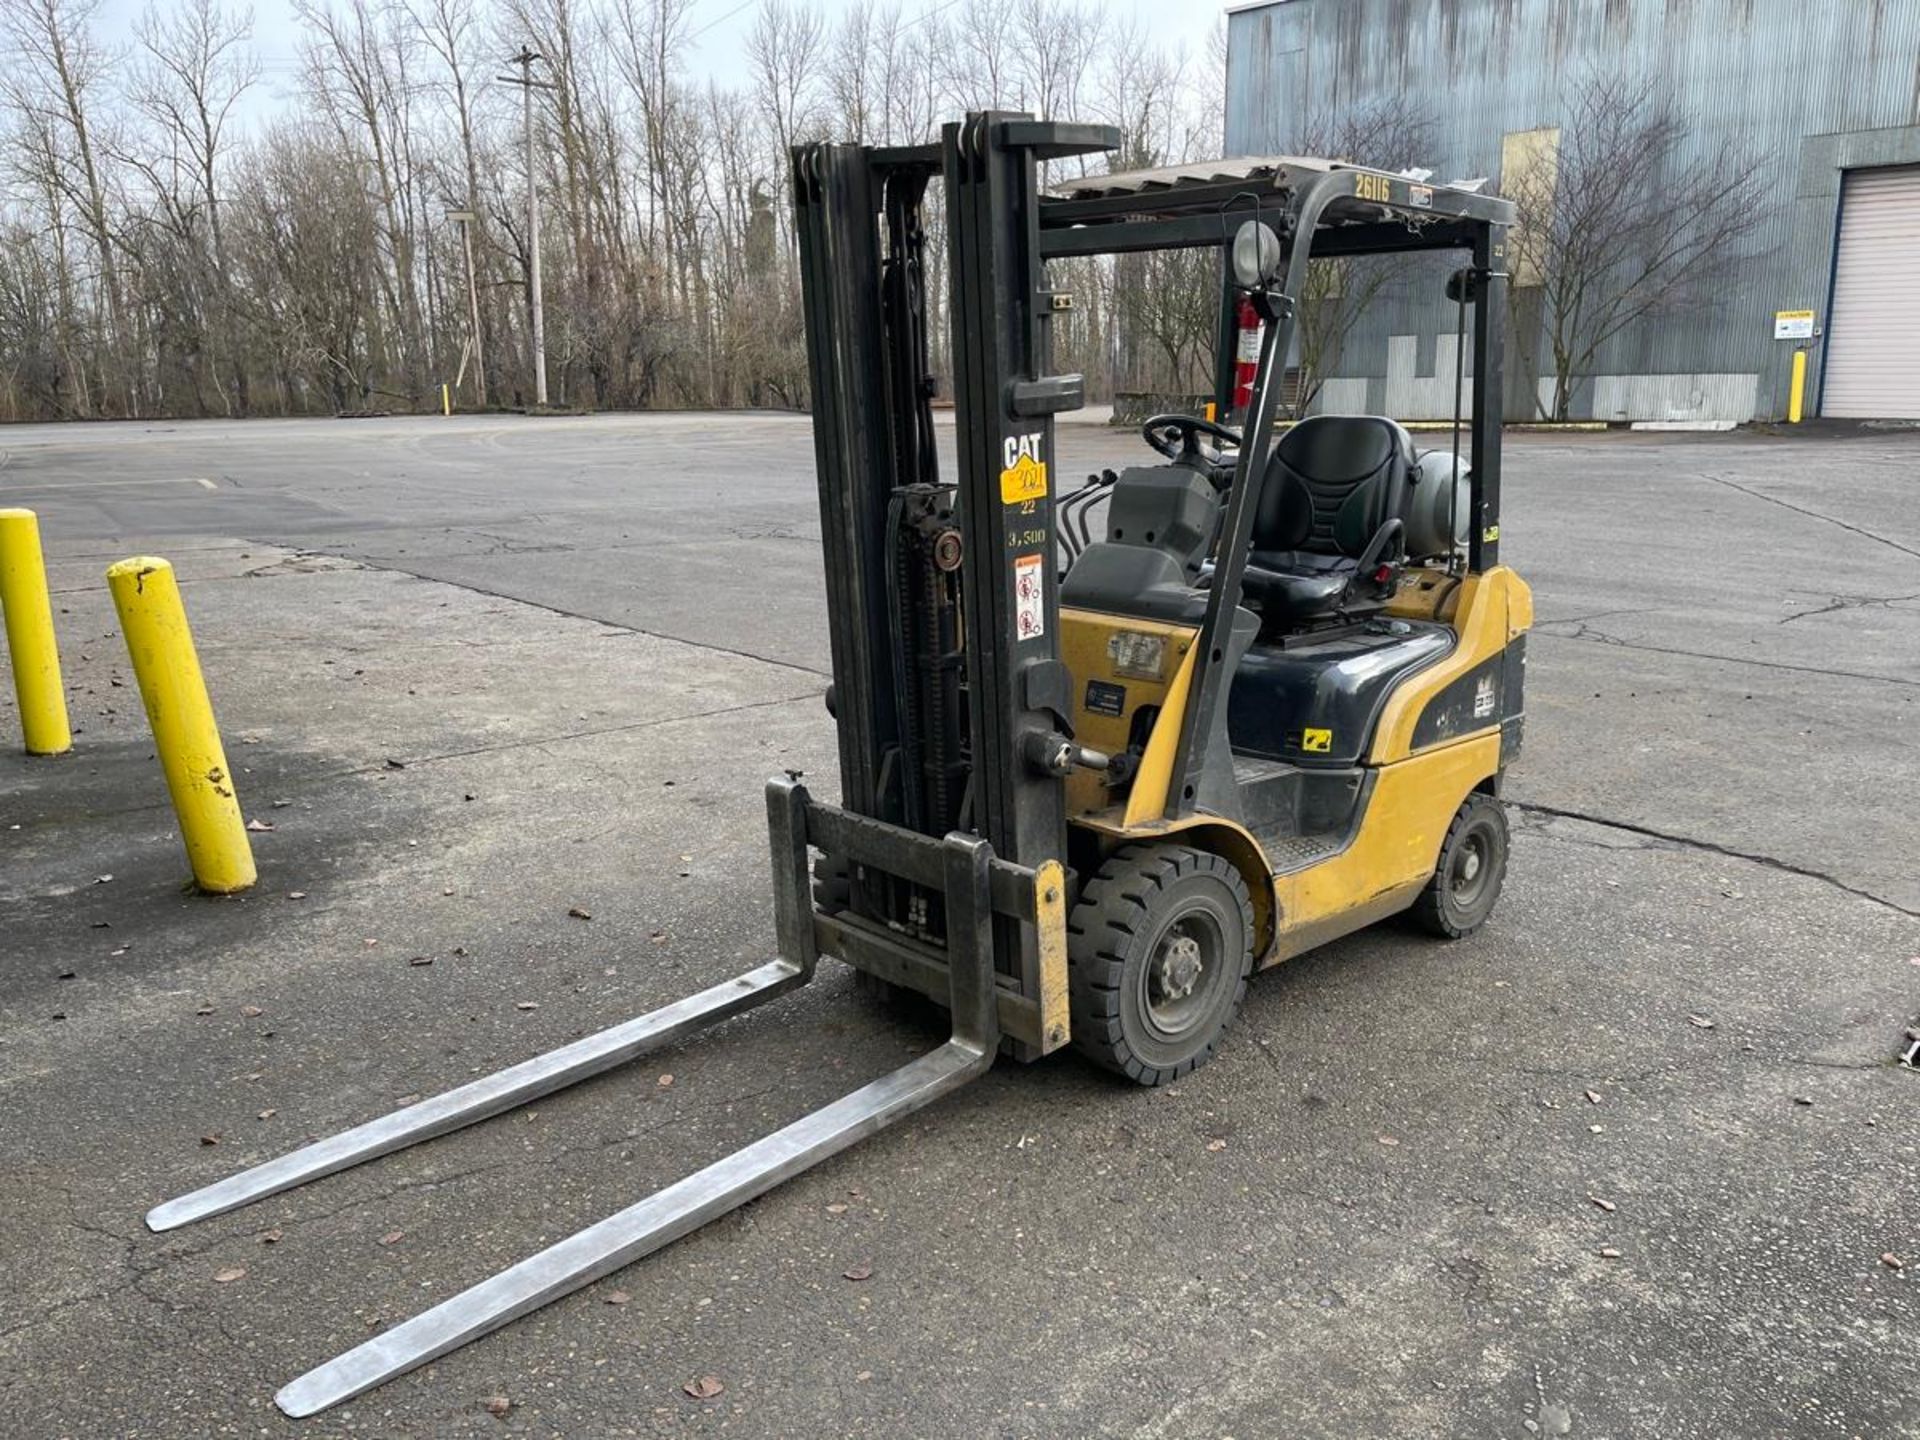 CAT Model P3500 2,450 Lb. Capacity LP Fork Truck [Late Delivery]